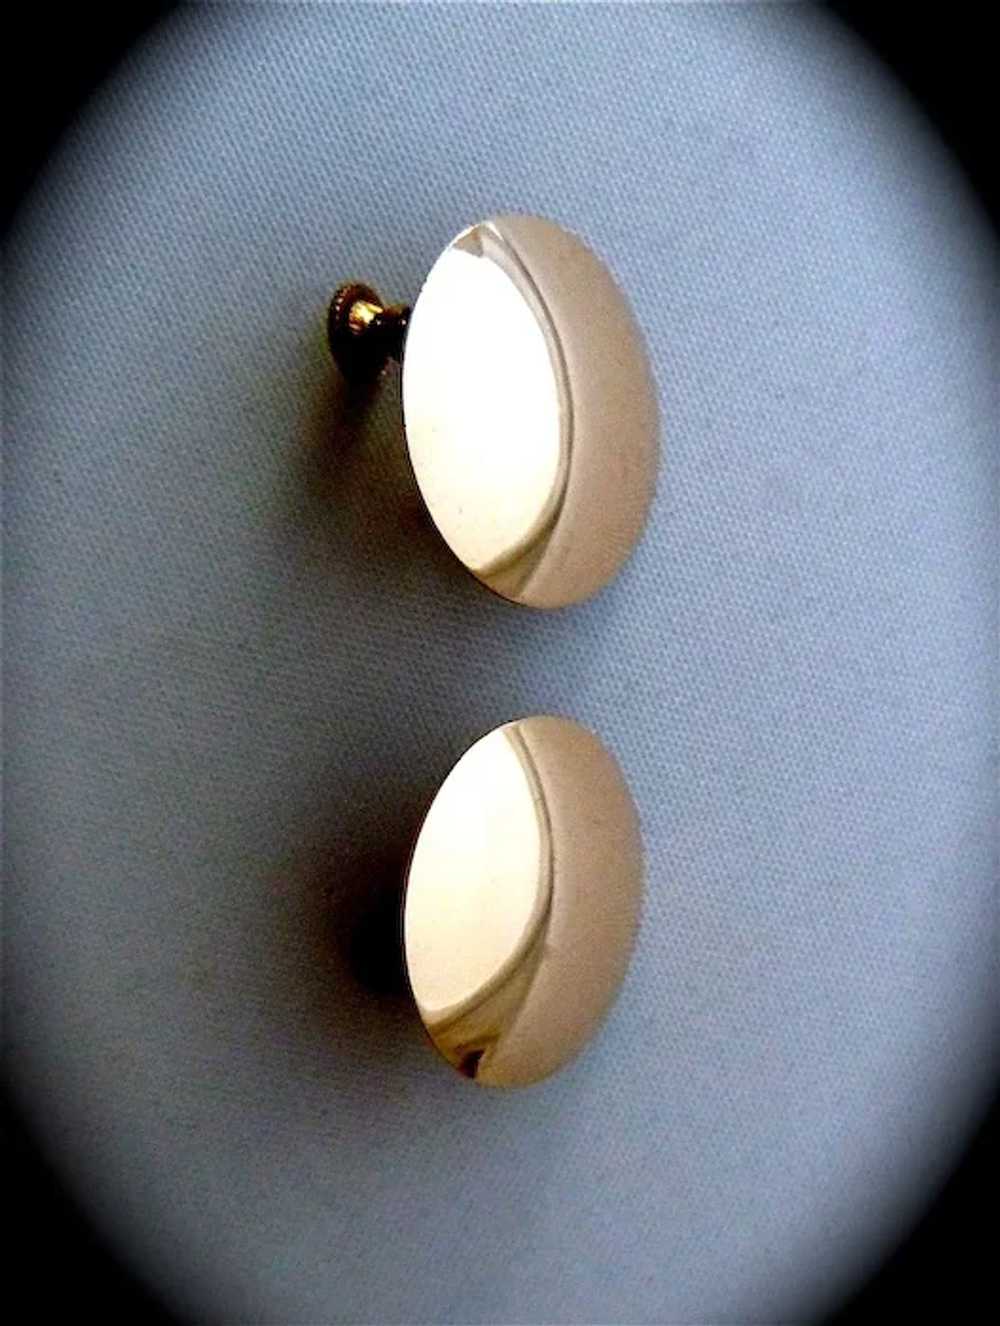 Vintage 10k Yellow Gold Dome Screw Back Earrings - image 3